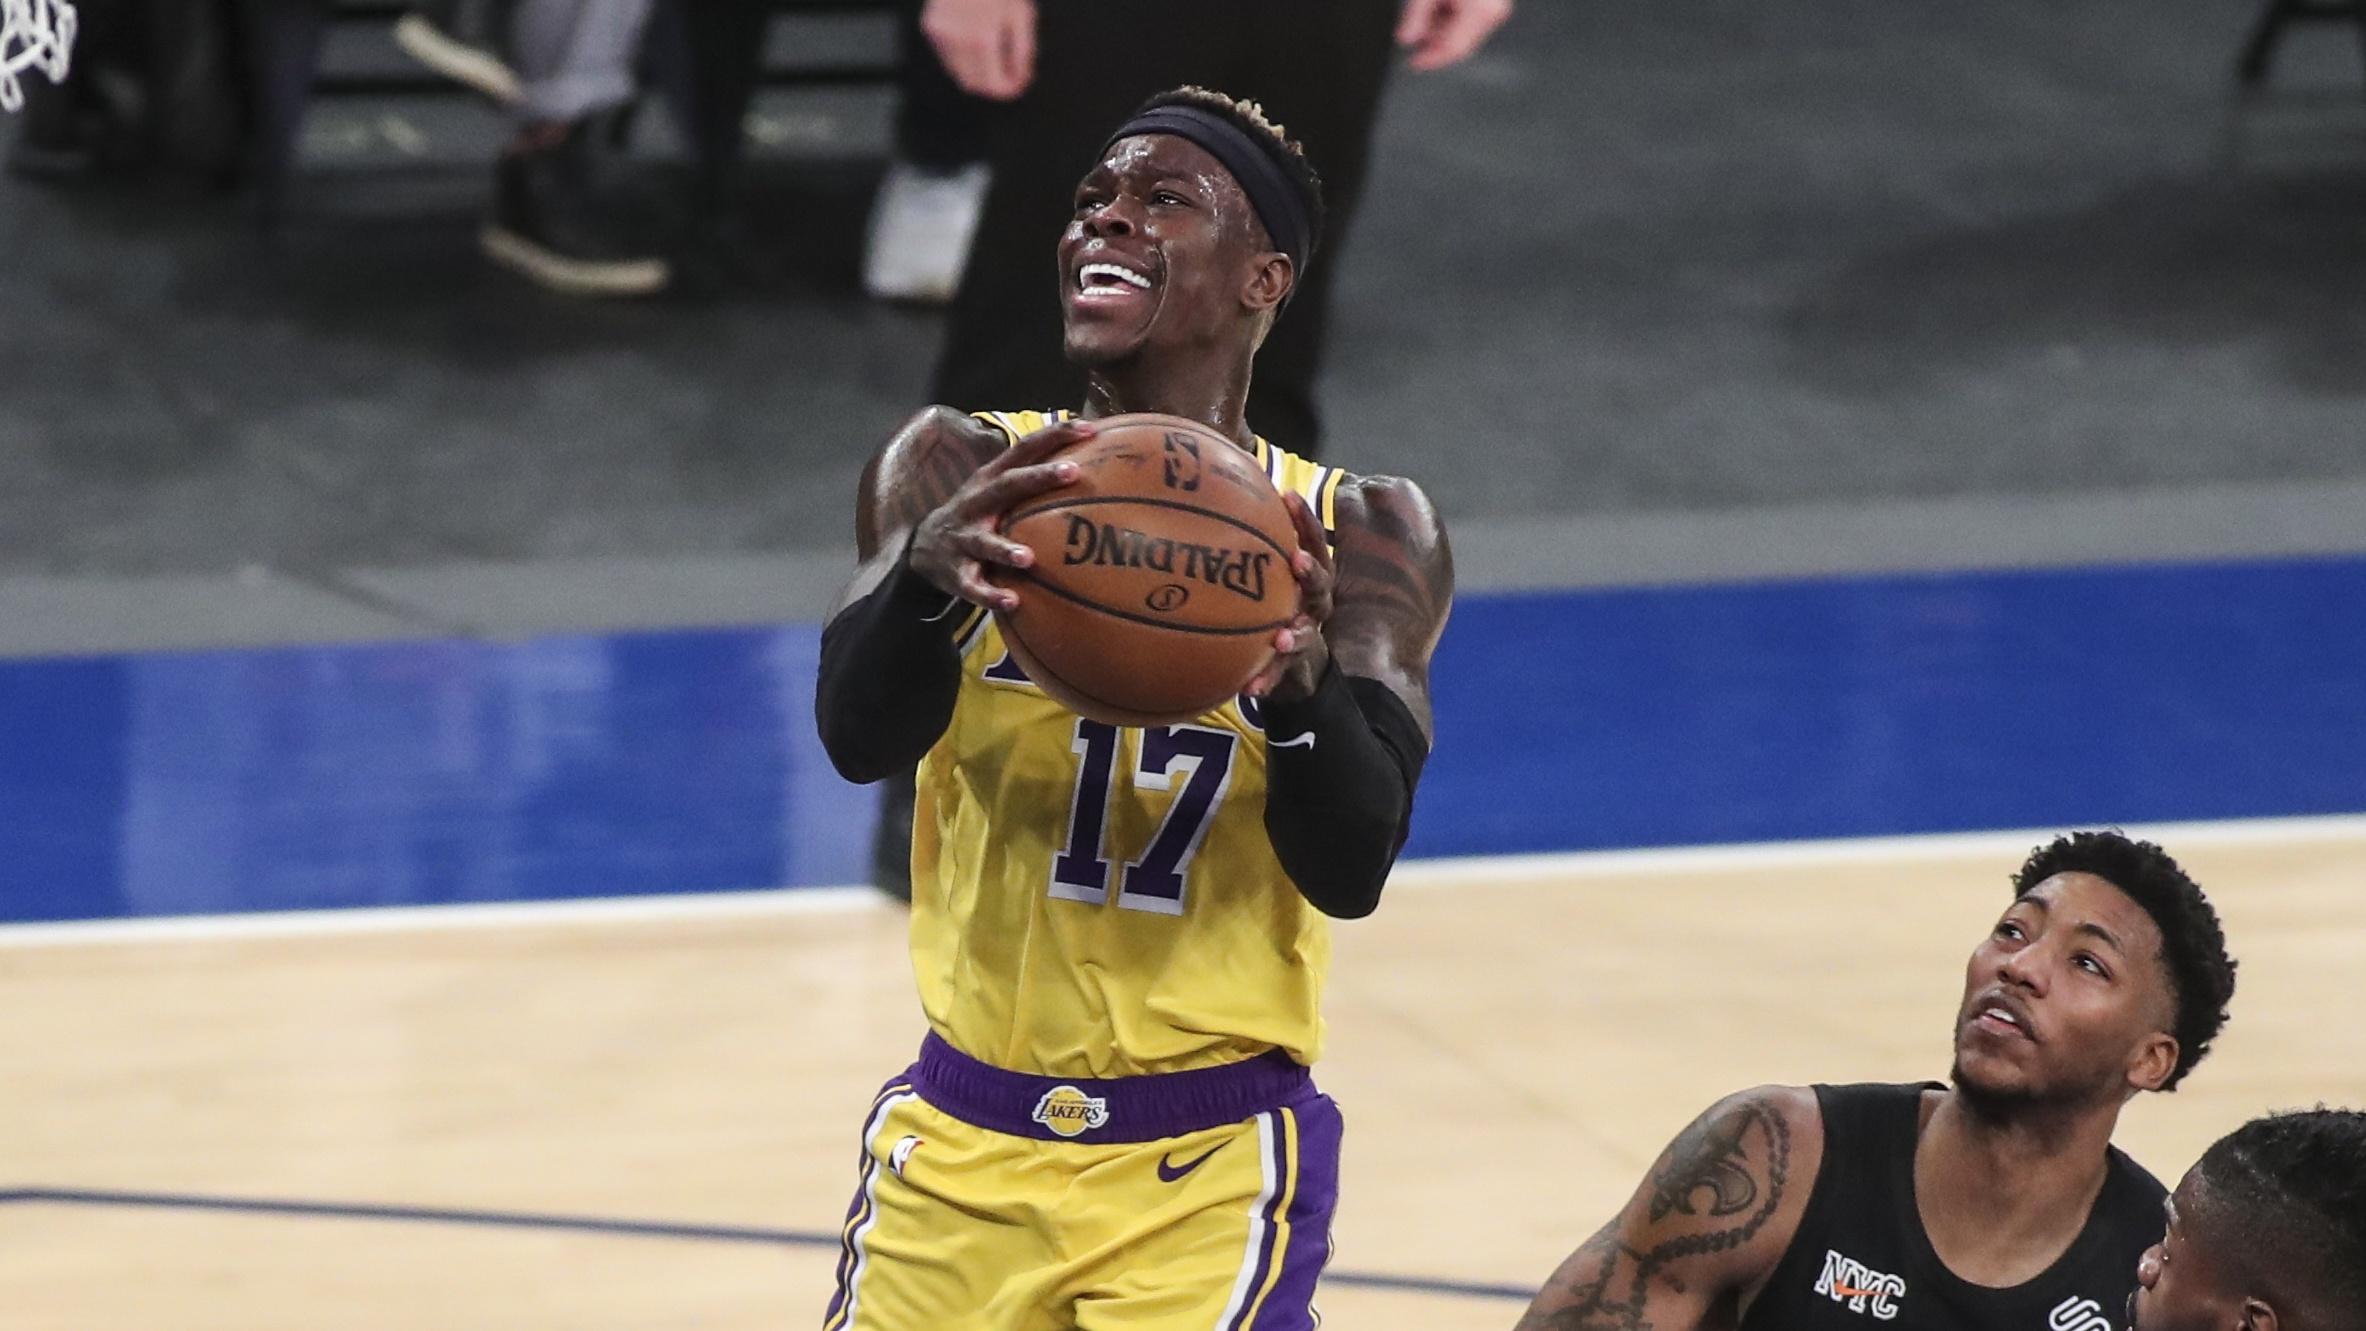 Apr 12, 2021; New York, New York, USA; Los Angeles Lakers guard Dennis Schroder (17) to the basket against the New York Knicks in the second quarter at Madison Square Garden. / © Wendell Cruz-USA TODAY Sports